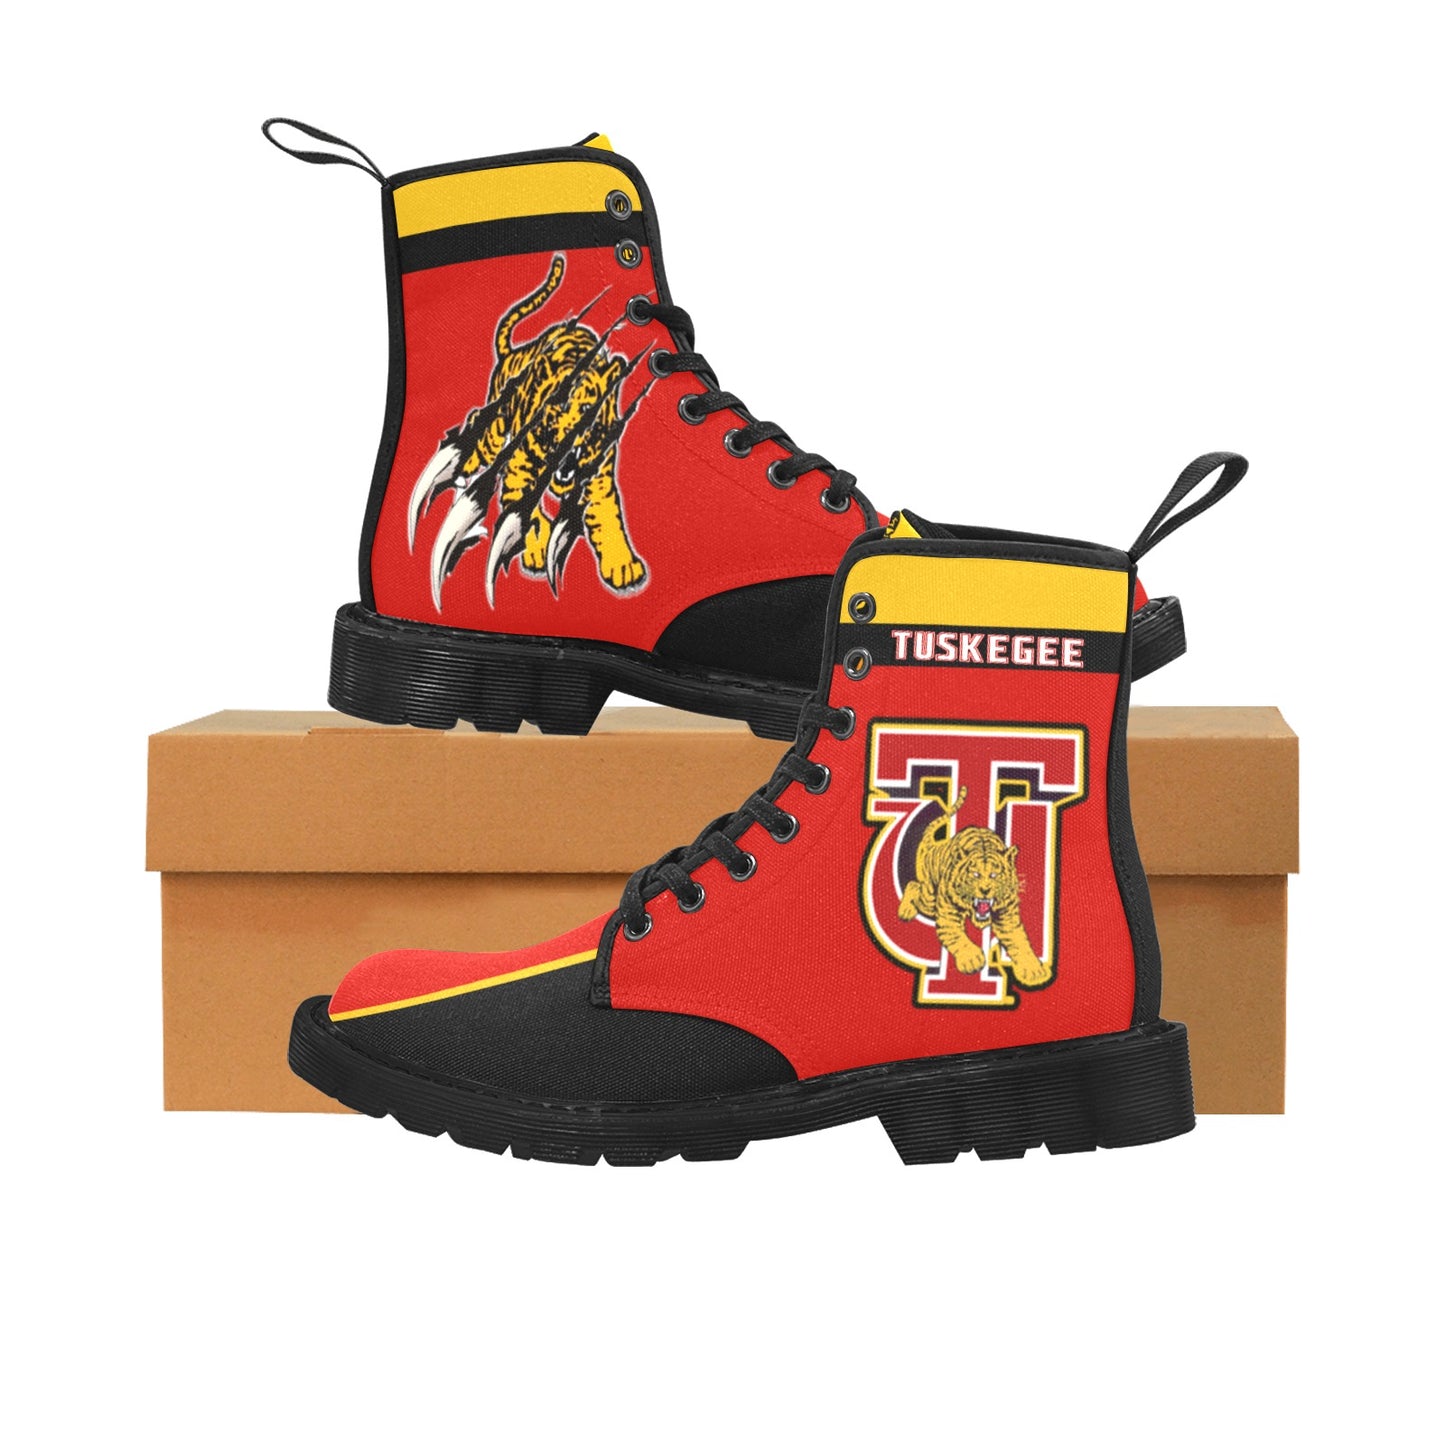 Tuskegee Martin Mens Boots